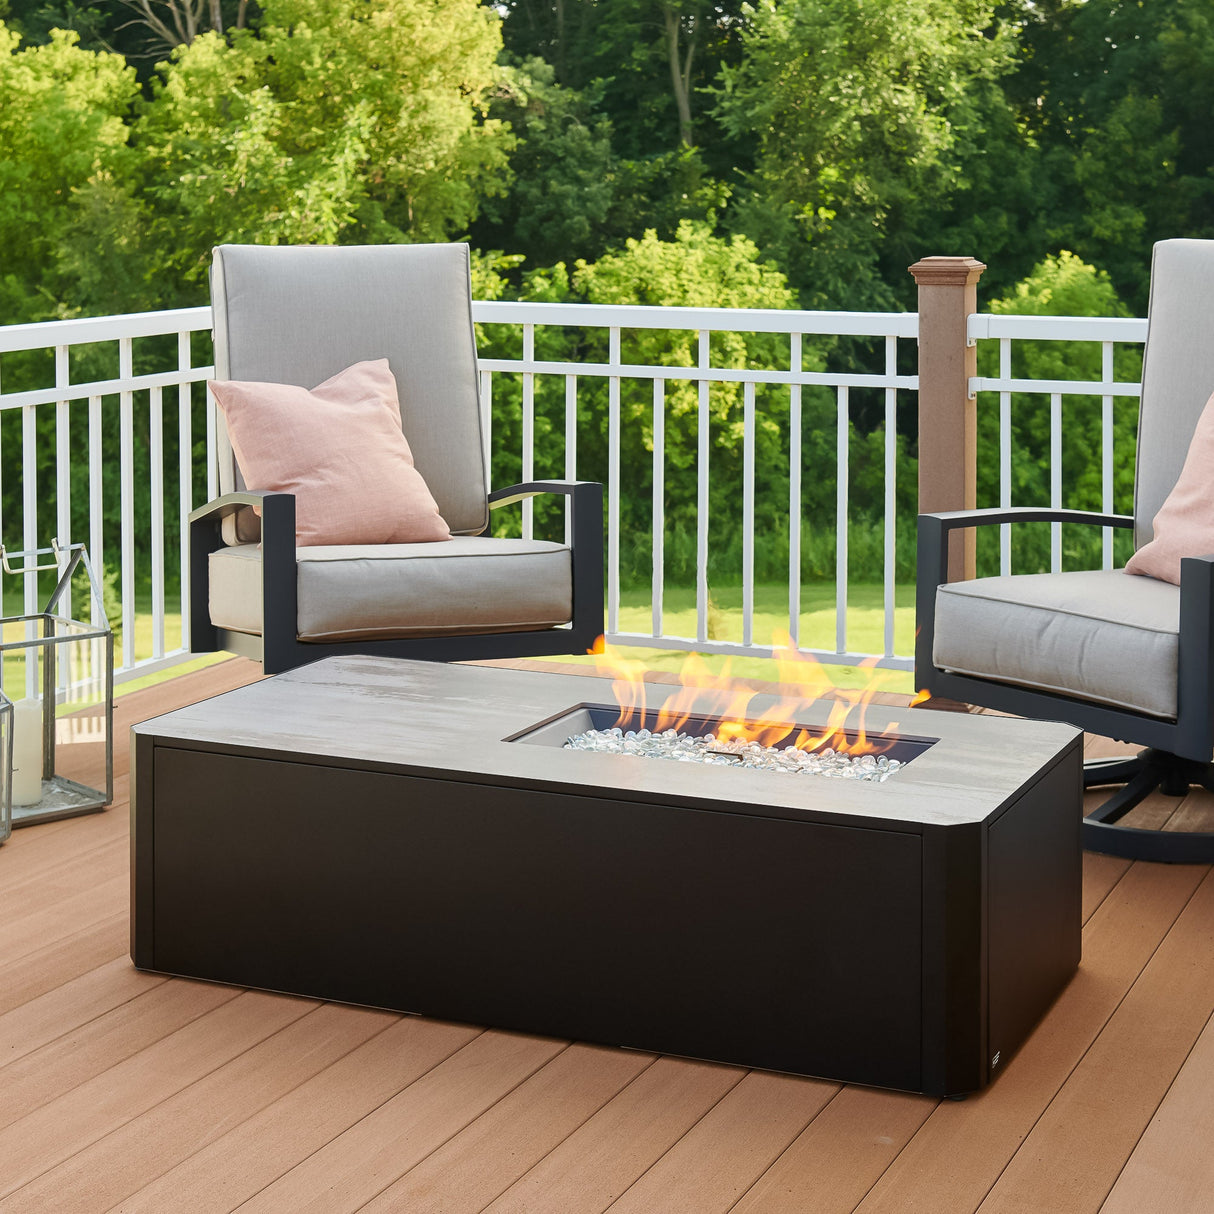 Kinney Rectangular Gas Fire Pit Table with a large flame coming from the burner in a patio setting